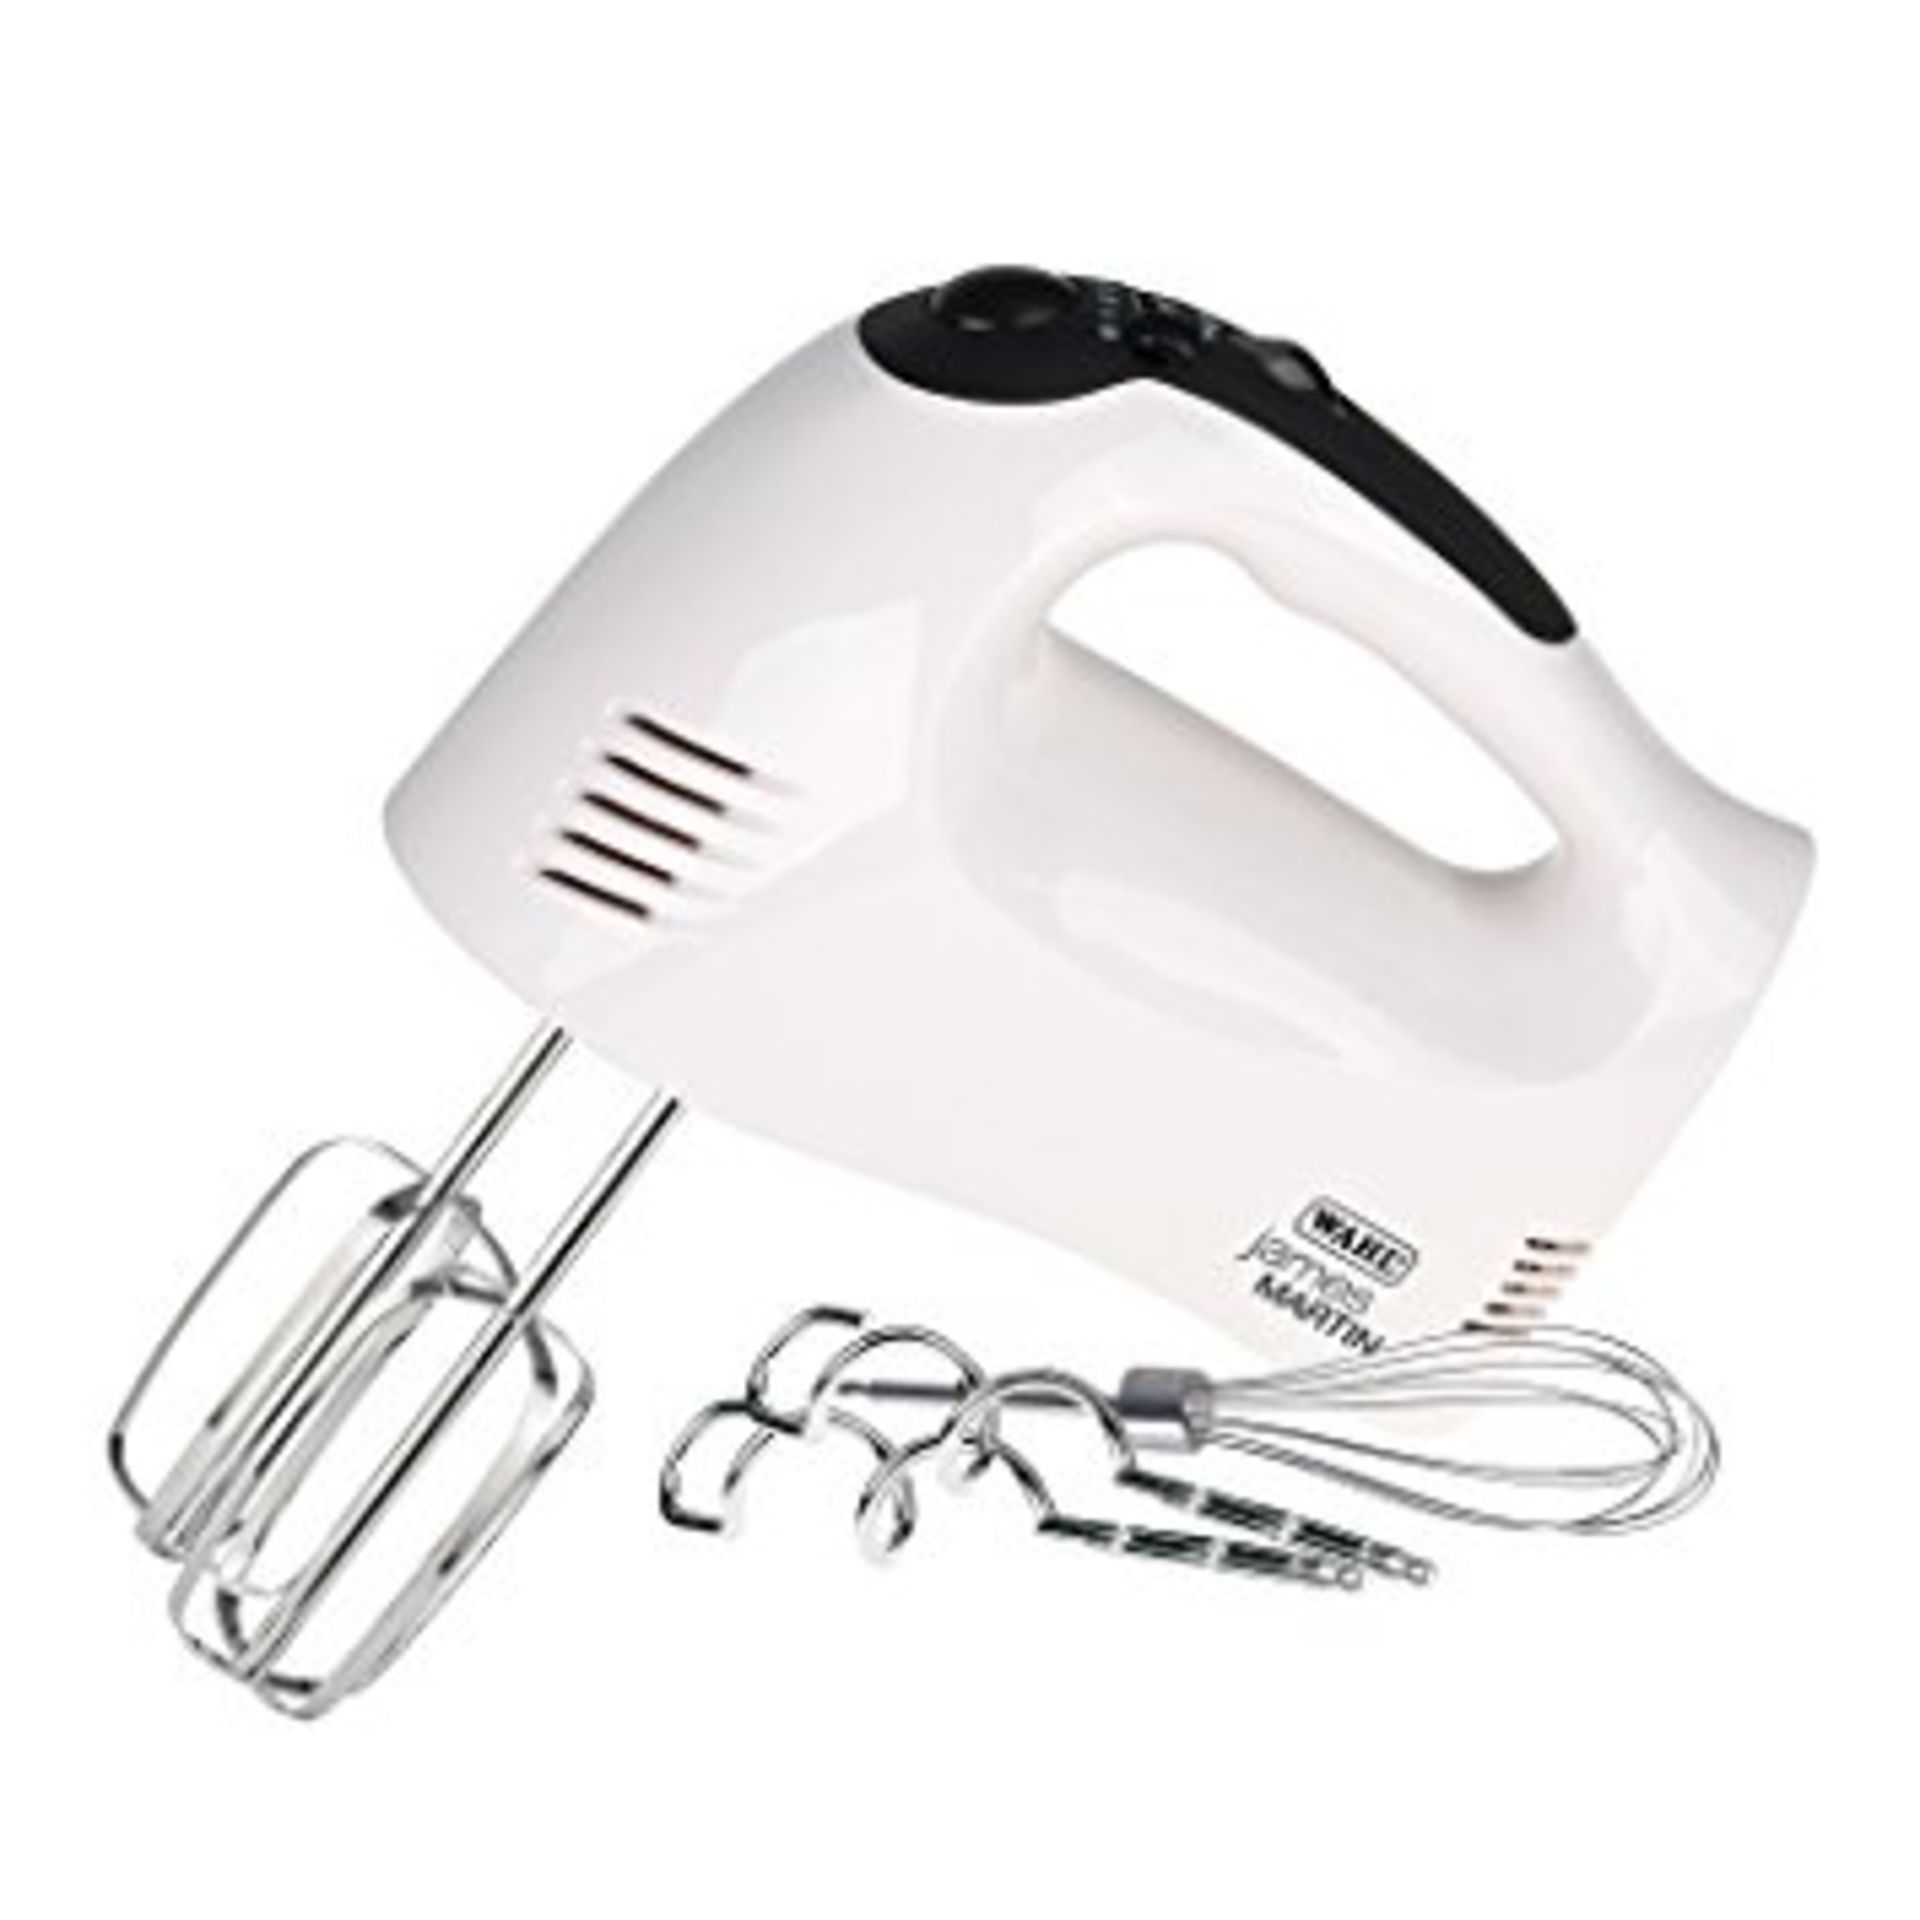 V Brand New 300W Hand Mixer with 5 Speeds and Turbo Function and Long Beaters and Dough Hooks (